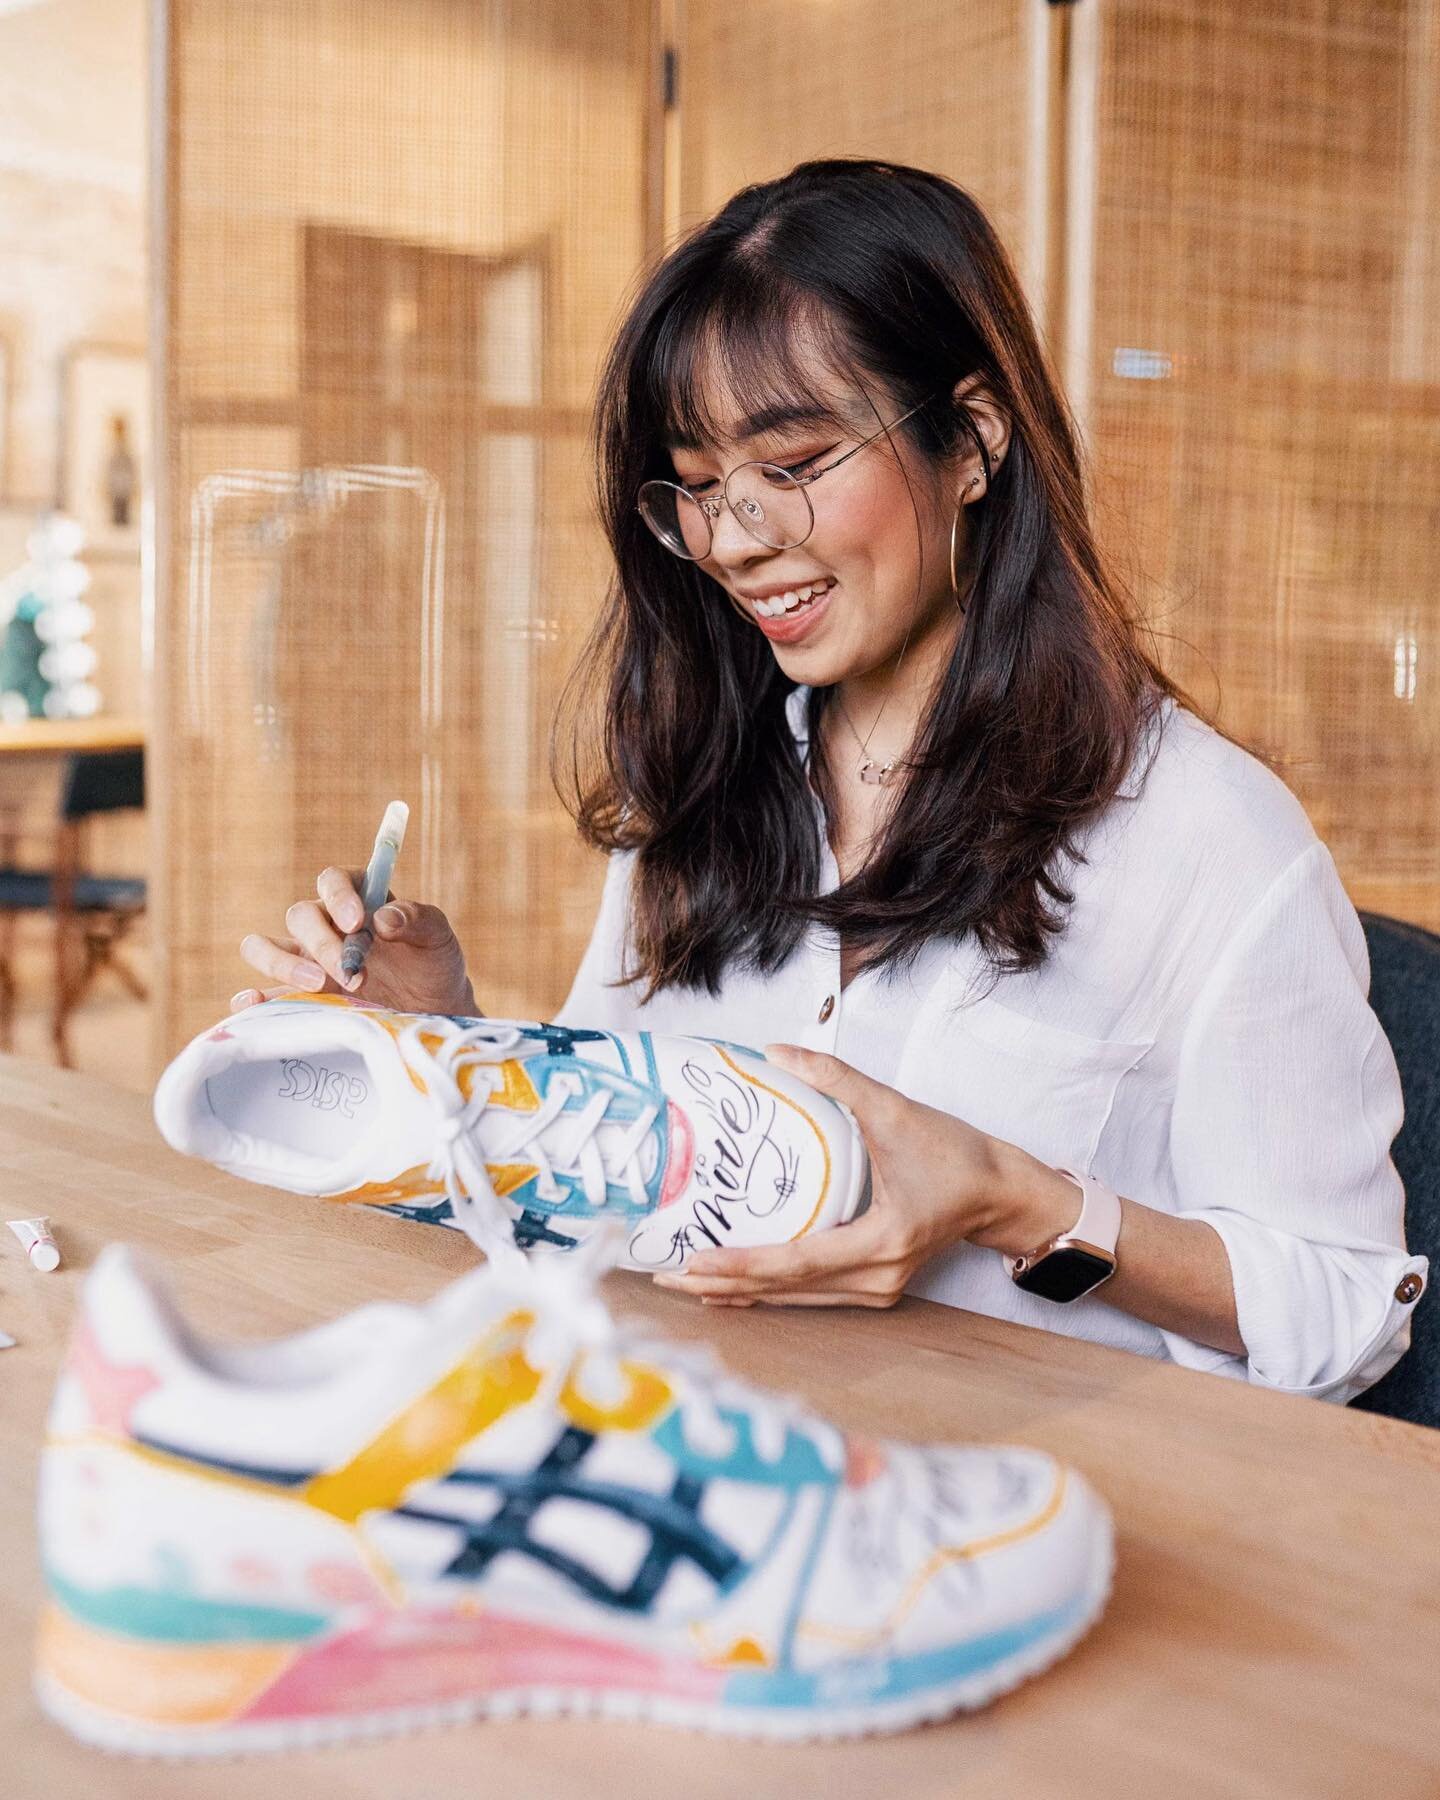 This year, ASICS is celebrating the 30th Anniversary of the GEL-LYTE III by collaborating with 30 creatives across Southeast Asia to make a mark of their own. I&rsquo;m excited to reveal my creative collaboration with ASICS and my own custom design o